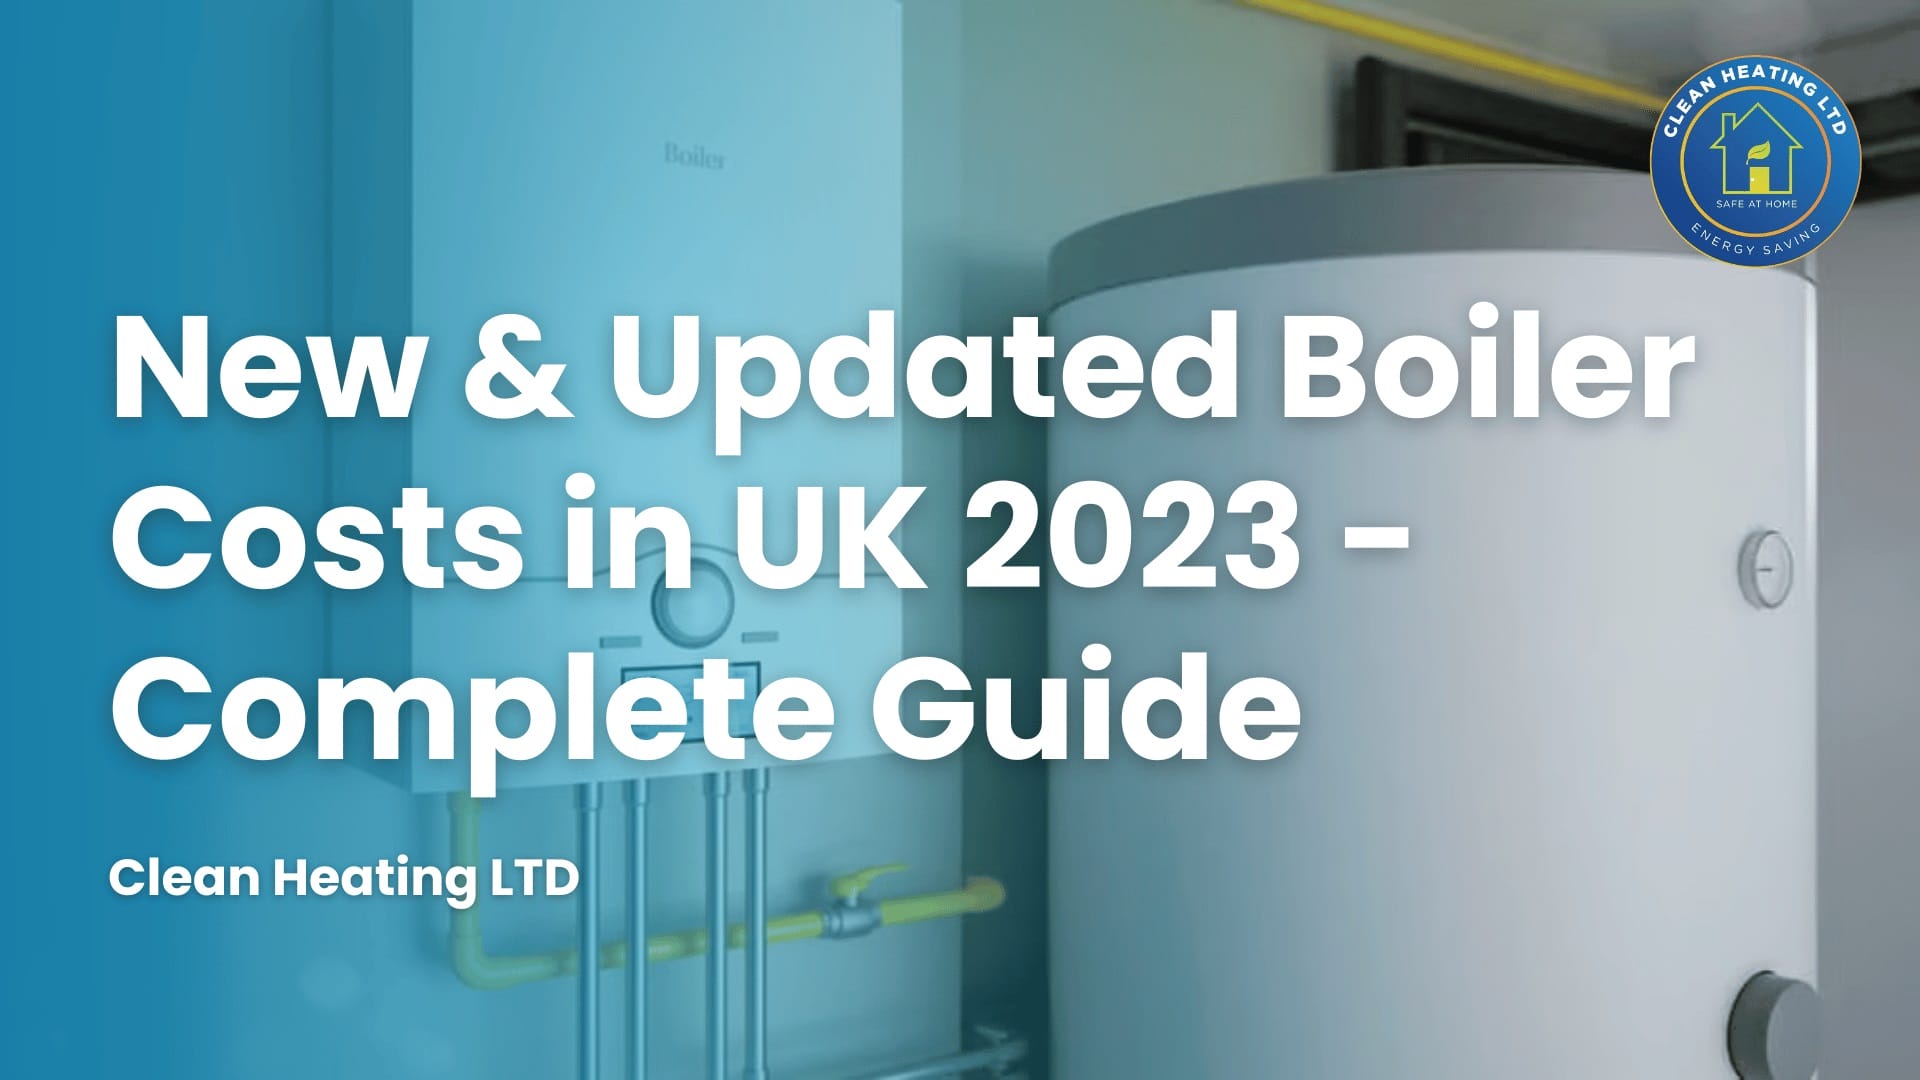 New Updated Boiler Costs in UK 2023 Complete Guide